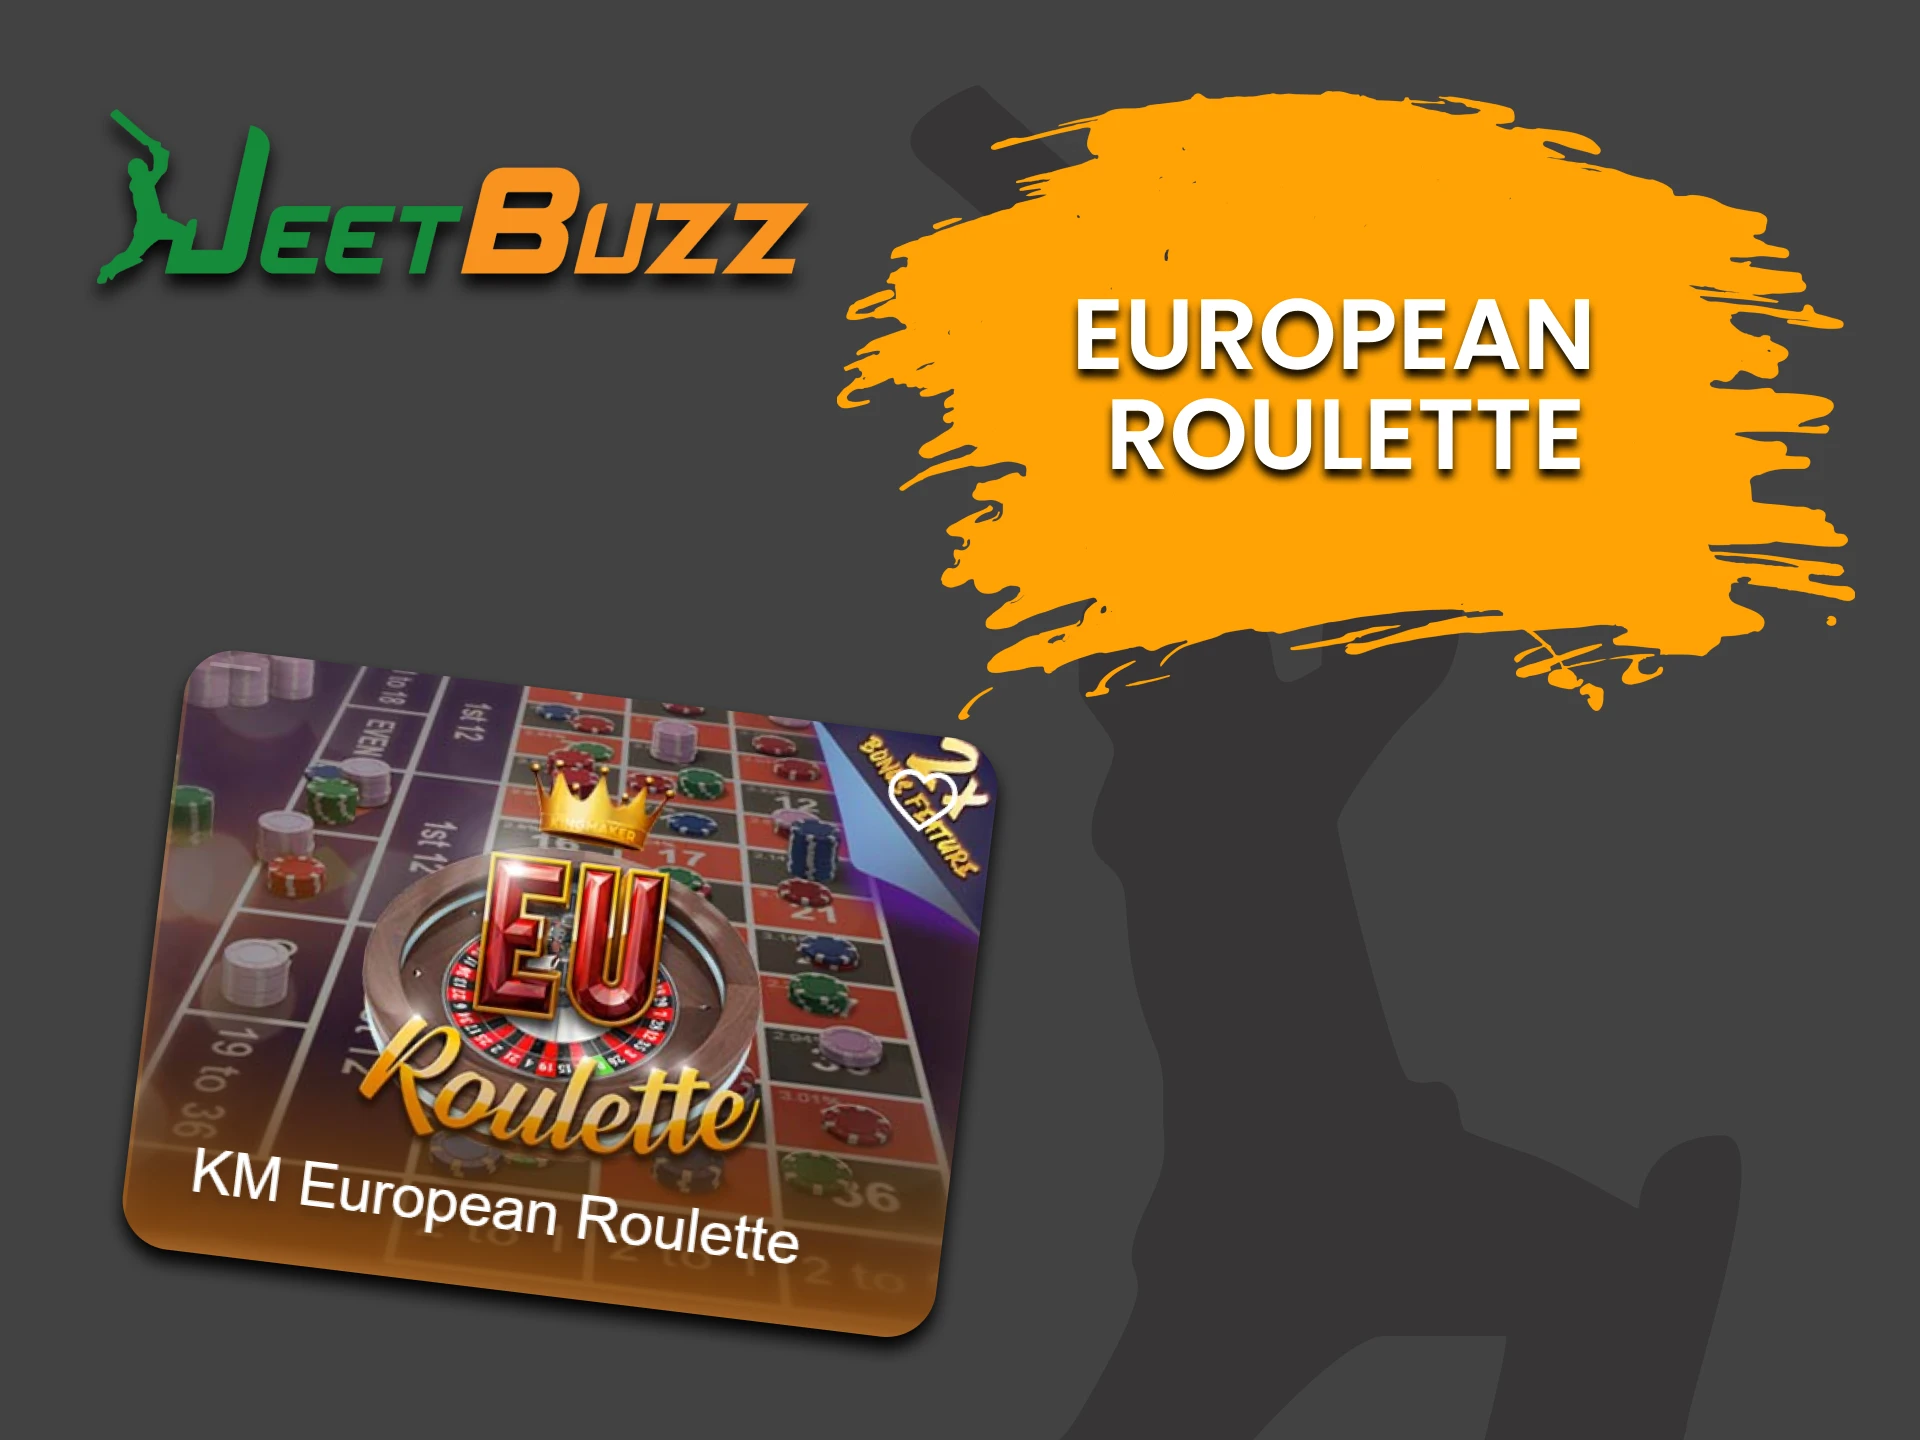 To play Roulette on JeetBuzz, choose European Roulette.